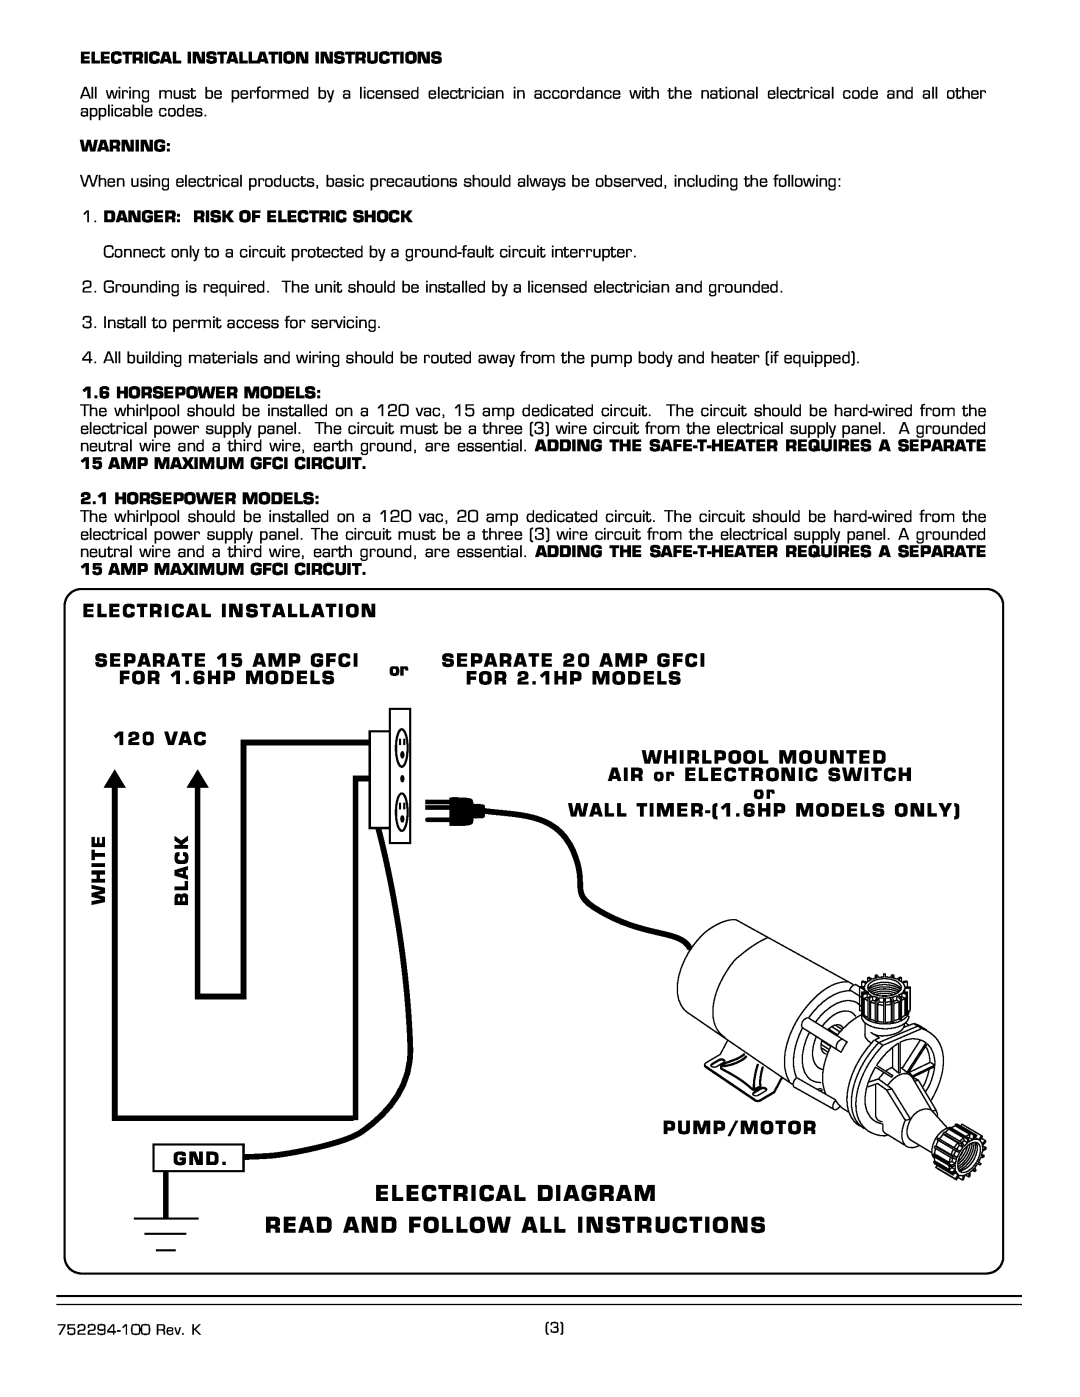 American Standard 2805.XXXW installation instructions Electrical Diagram, Read And Follow All Instructions 